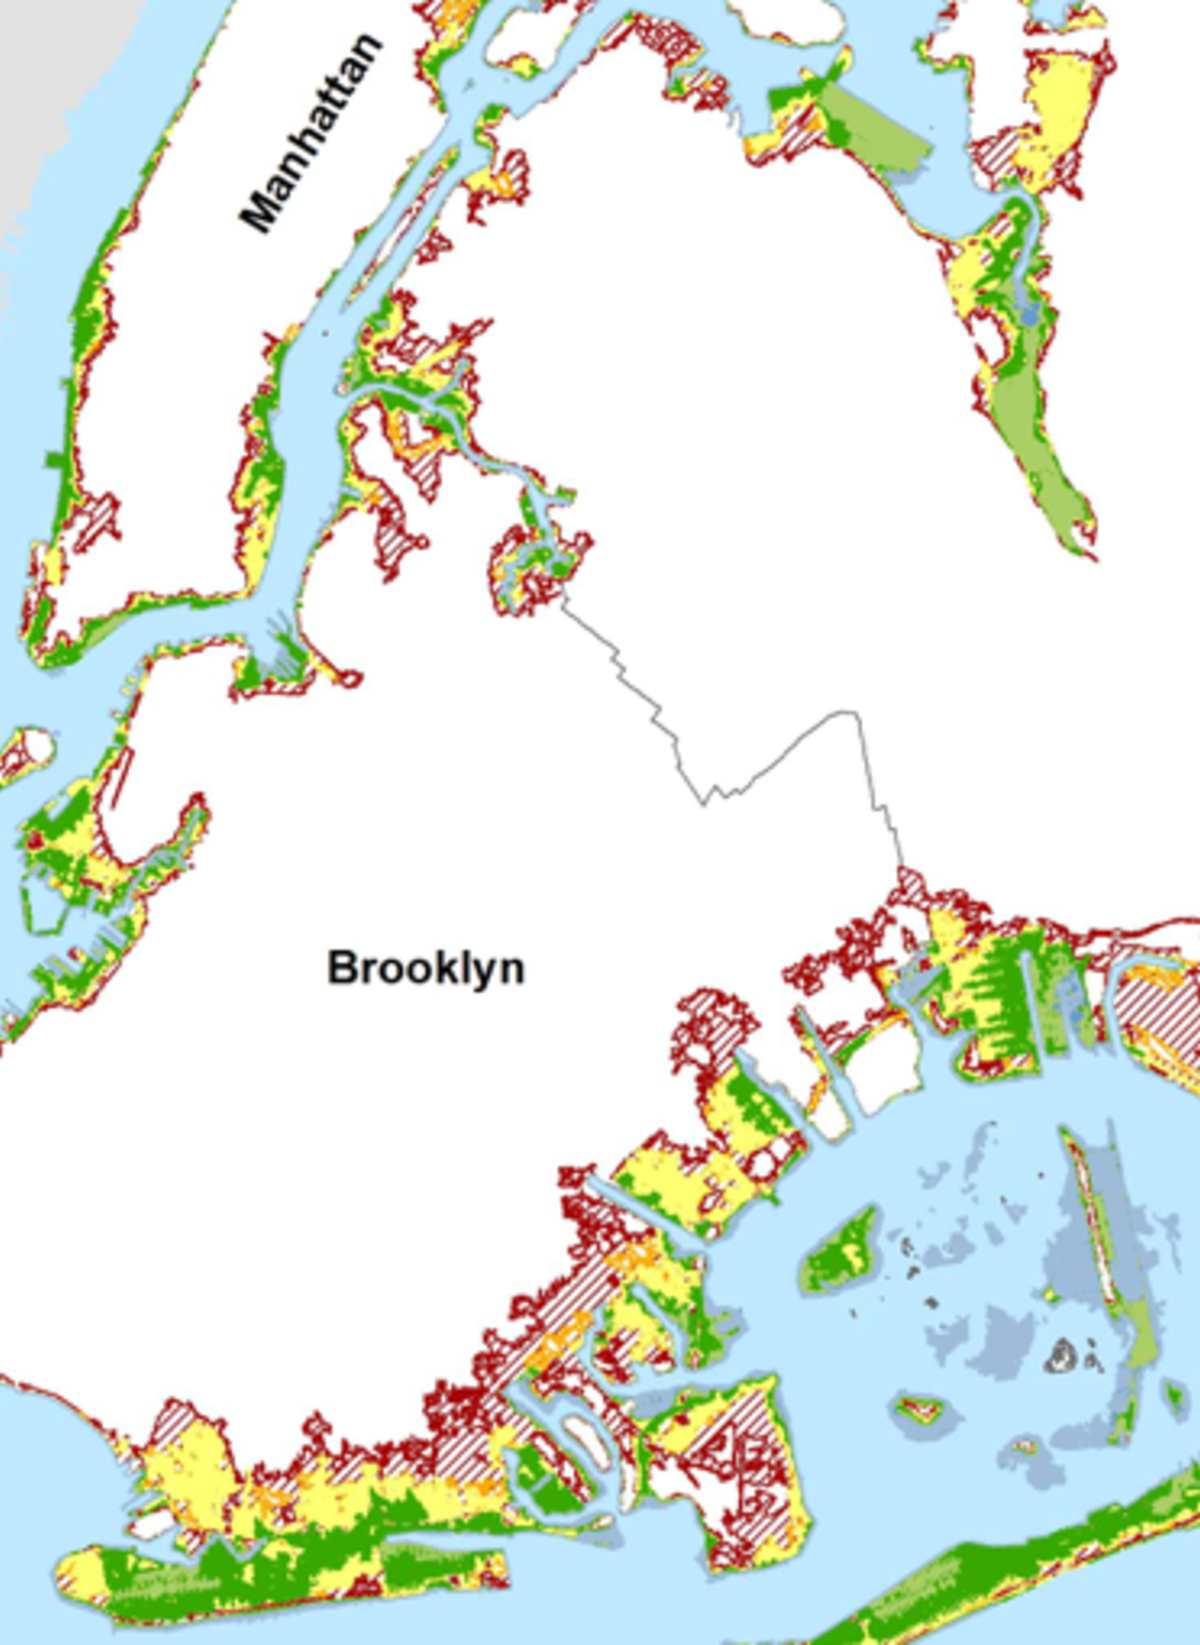 Map showing New York City's monthly floods